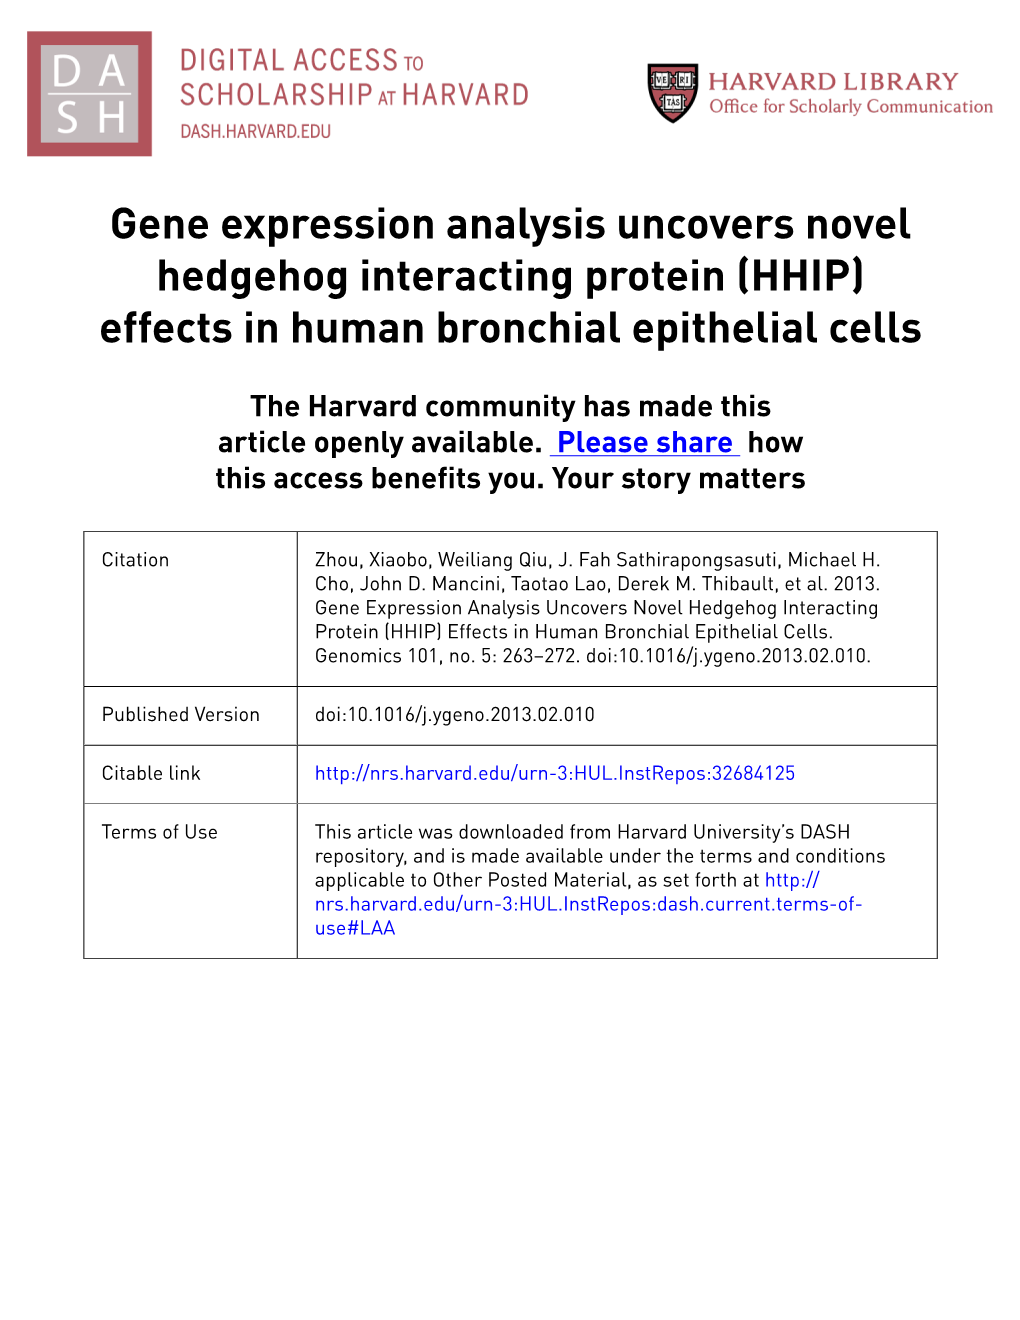 Gene Expression Analysis Uncovers Novel Hedgehog Interacting Protein (HHIP) Effects in Human Bronchial Epithelial Cells